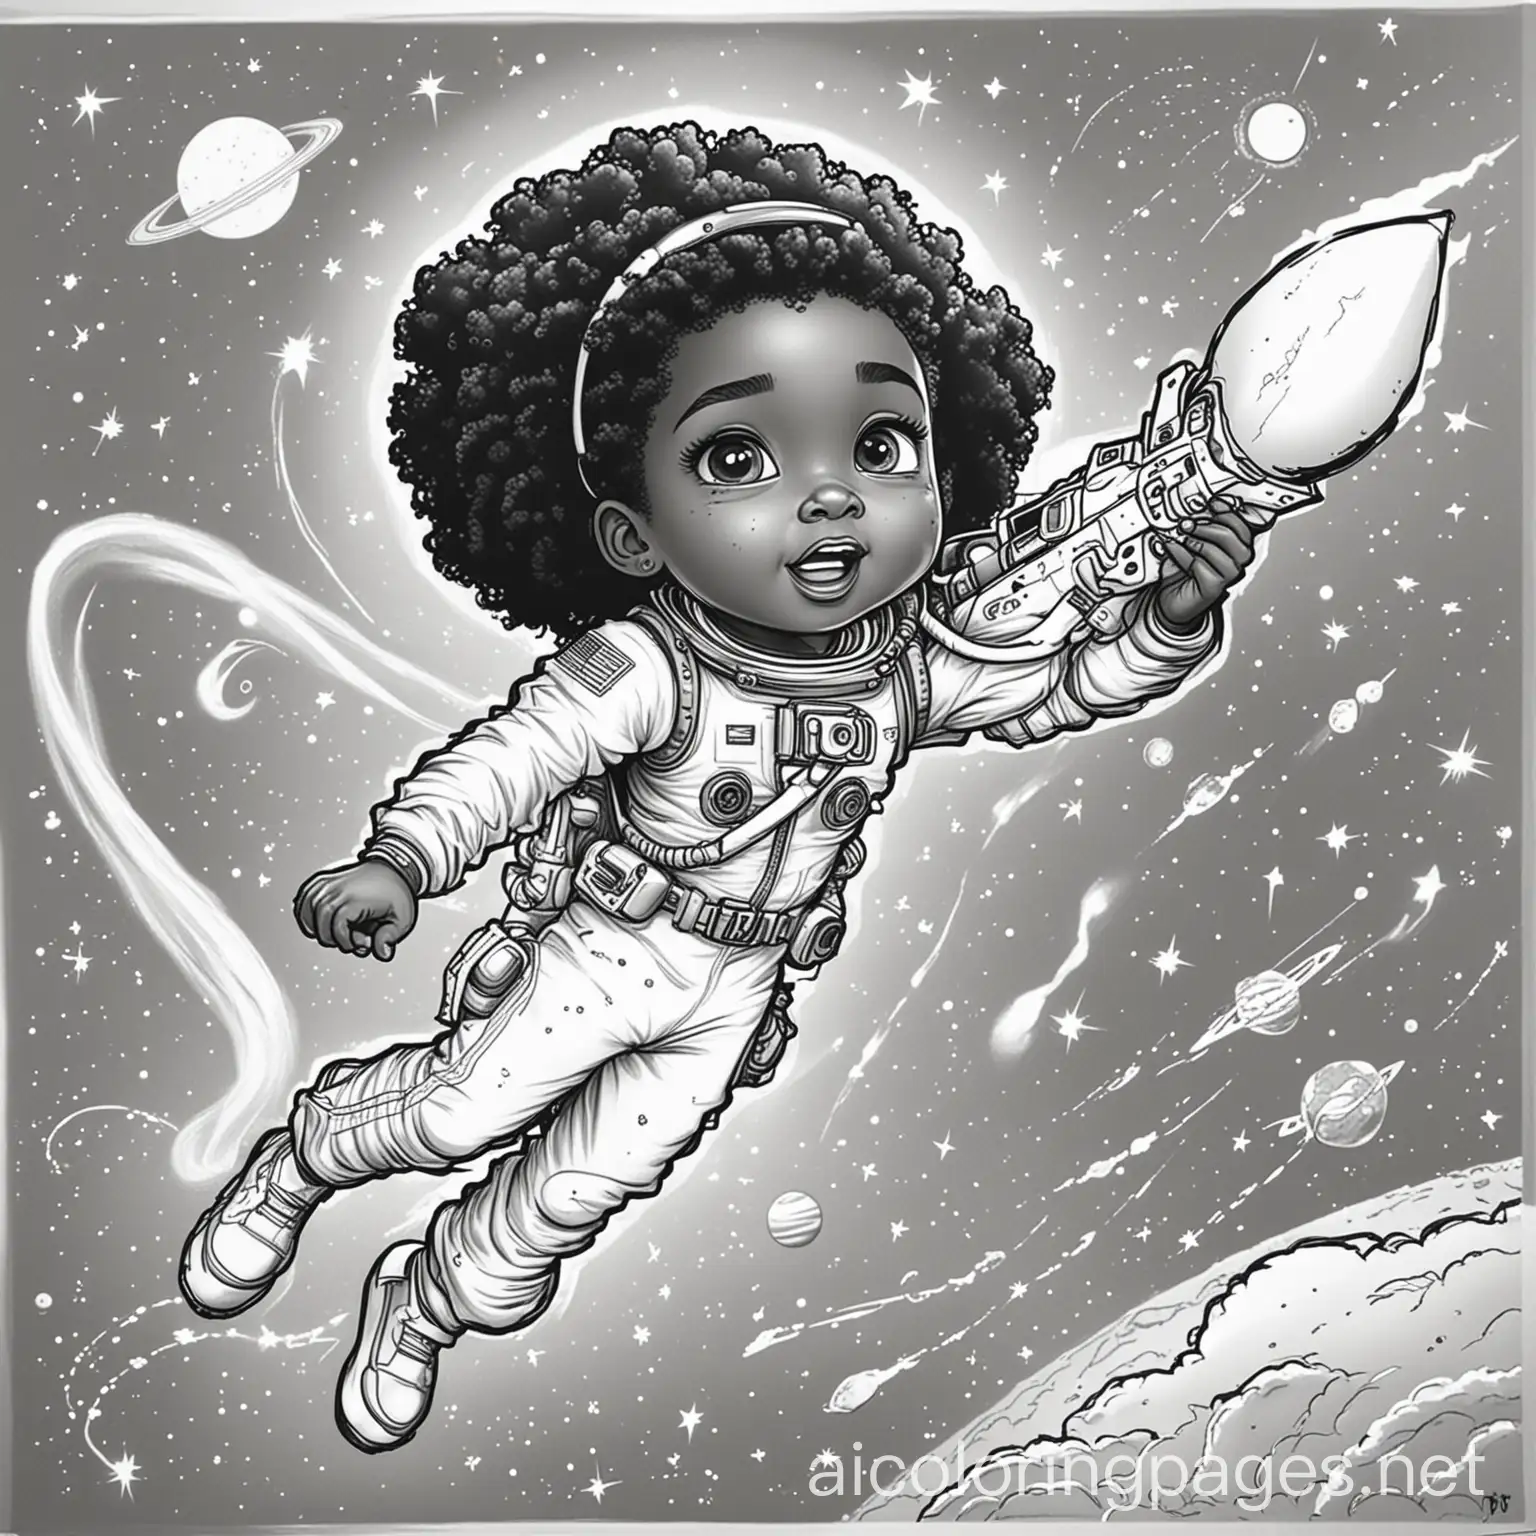 a african american kids blasting through space, Coloring Page, black and white, line art, white background, Simplicity, Ample White Space. The background of the coloring page is plain white to make it easy for young children to color within the lines. The outlines of all the subjects are easy to distinguish, making it simple for kids to color without too much difficulty